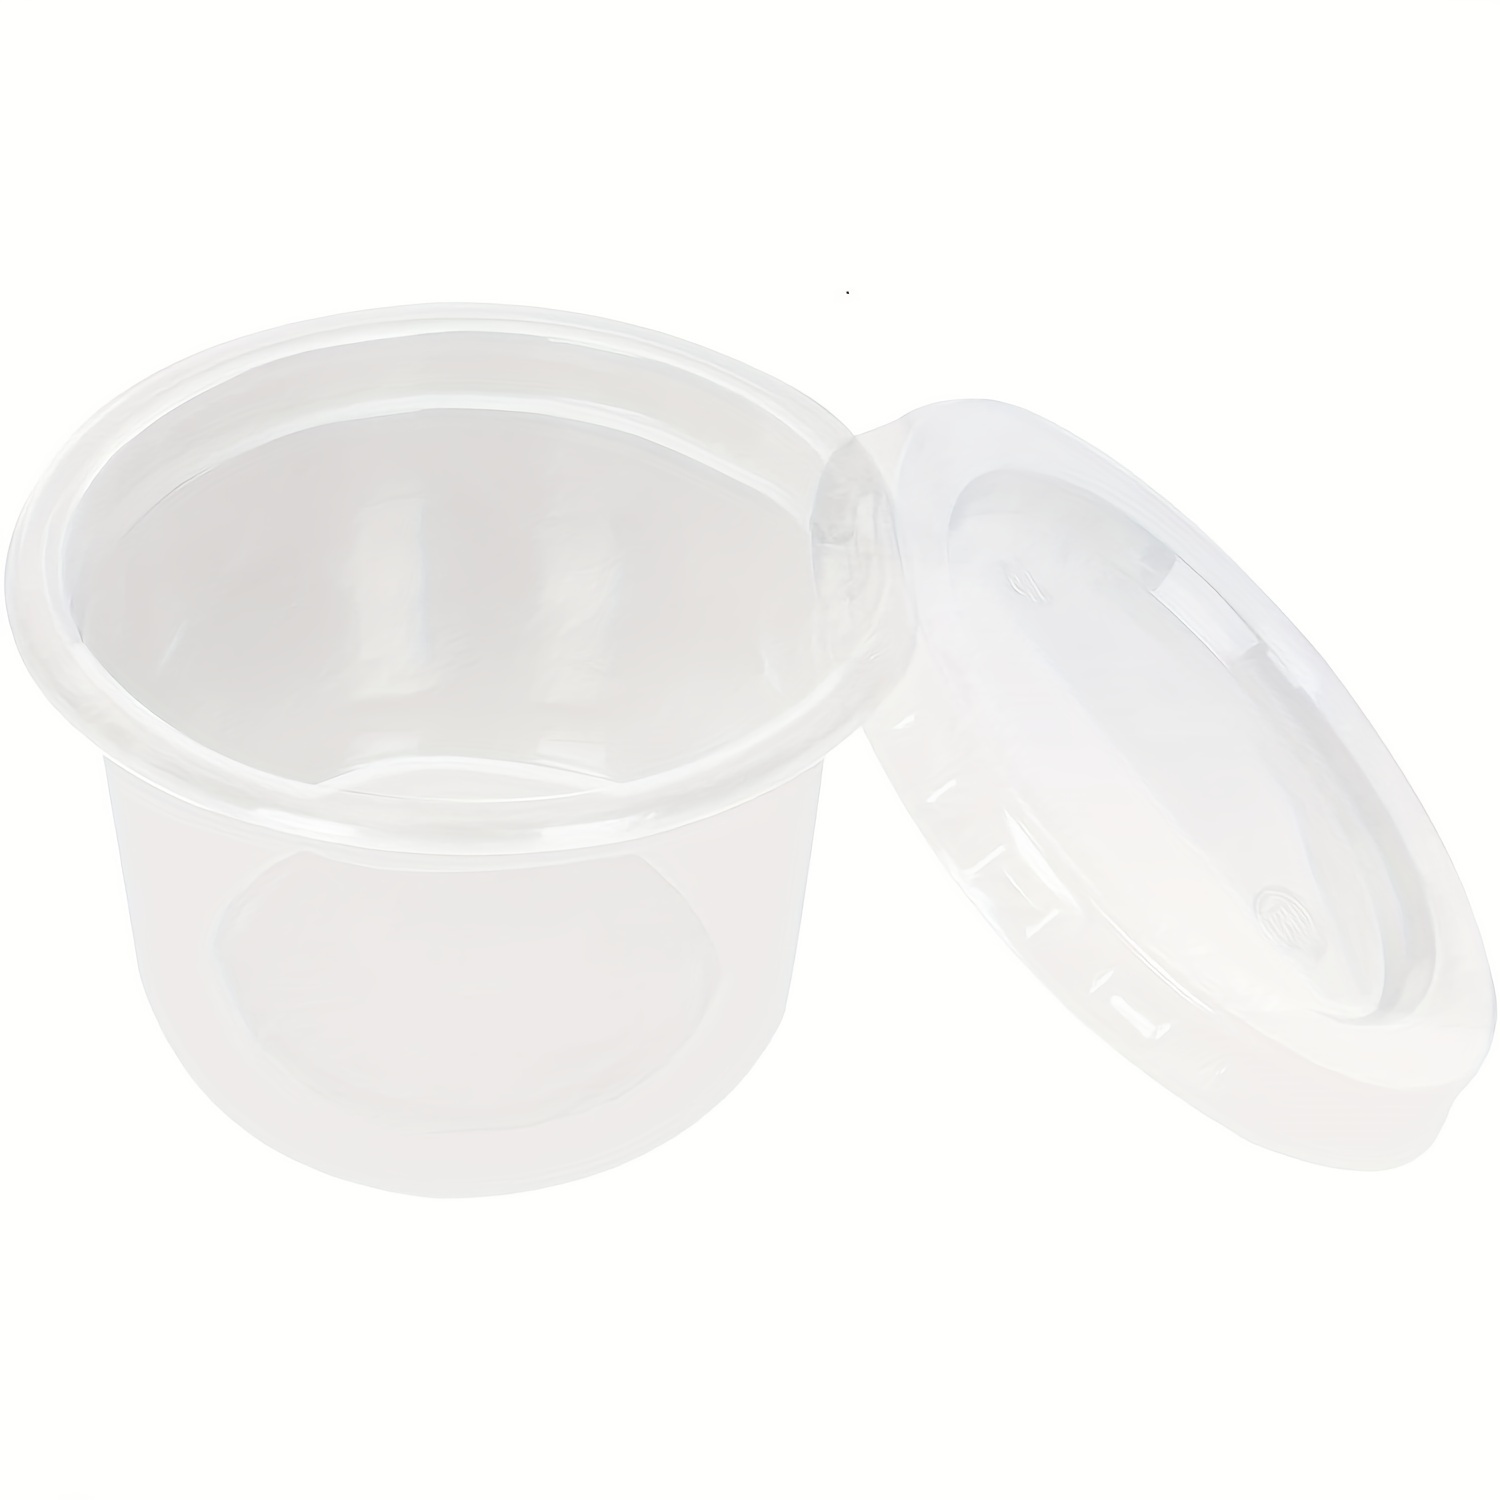 

4.8oz/140ml Disposable Plastic Portion Cups With Lids, Clear Portion Container For Food And Beverages, Souffle Cups, Condiment Cups For Restaurants/bakery/cafe